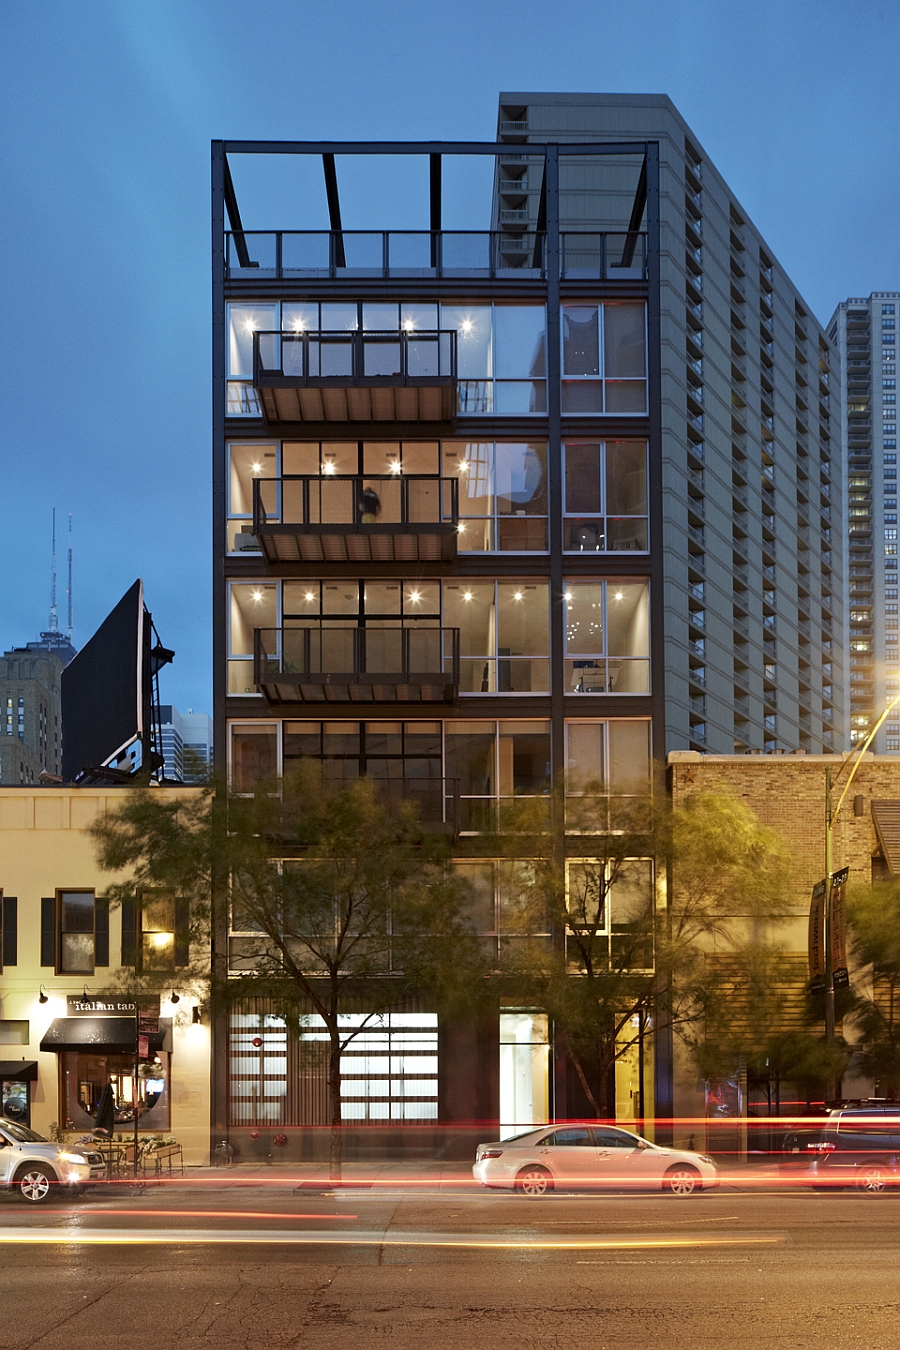 Steel and glass facade gives the building the timeless Chicago charm